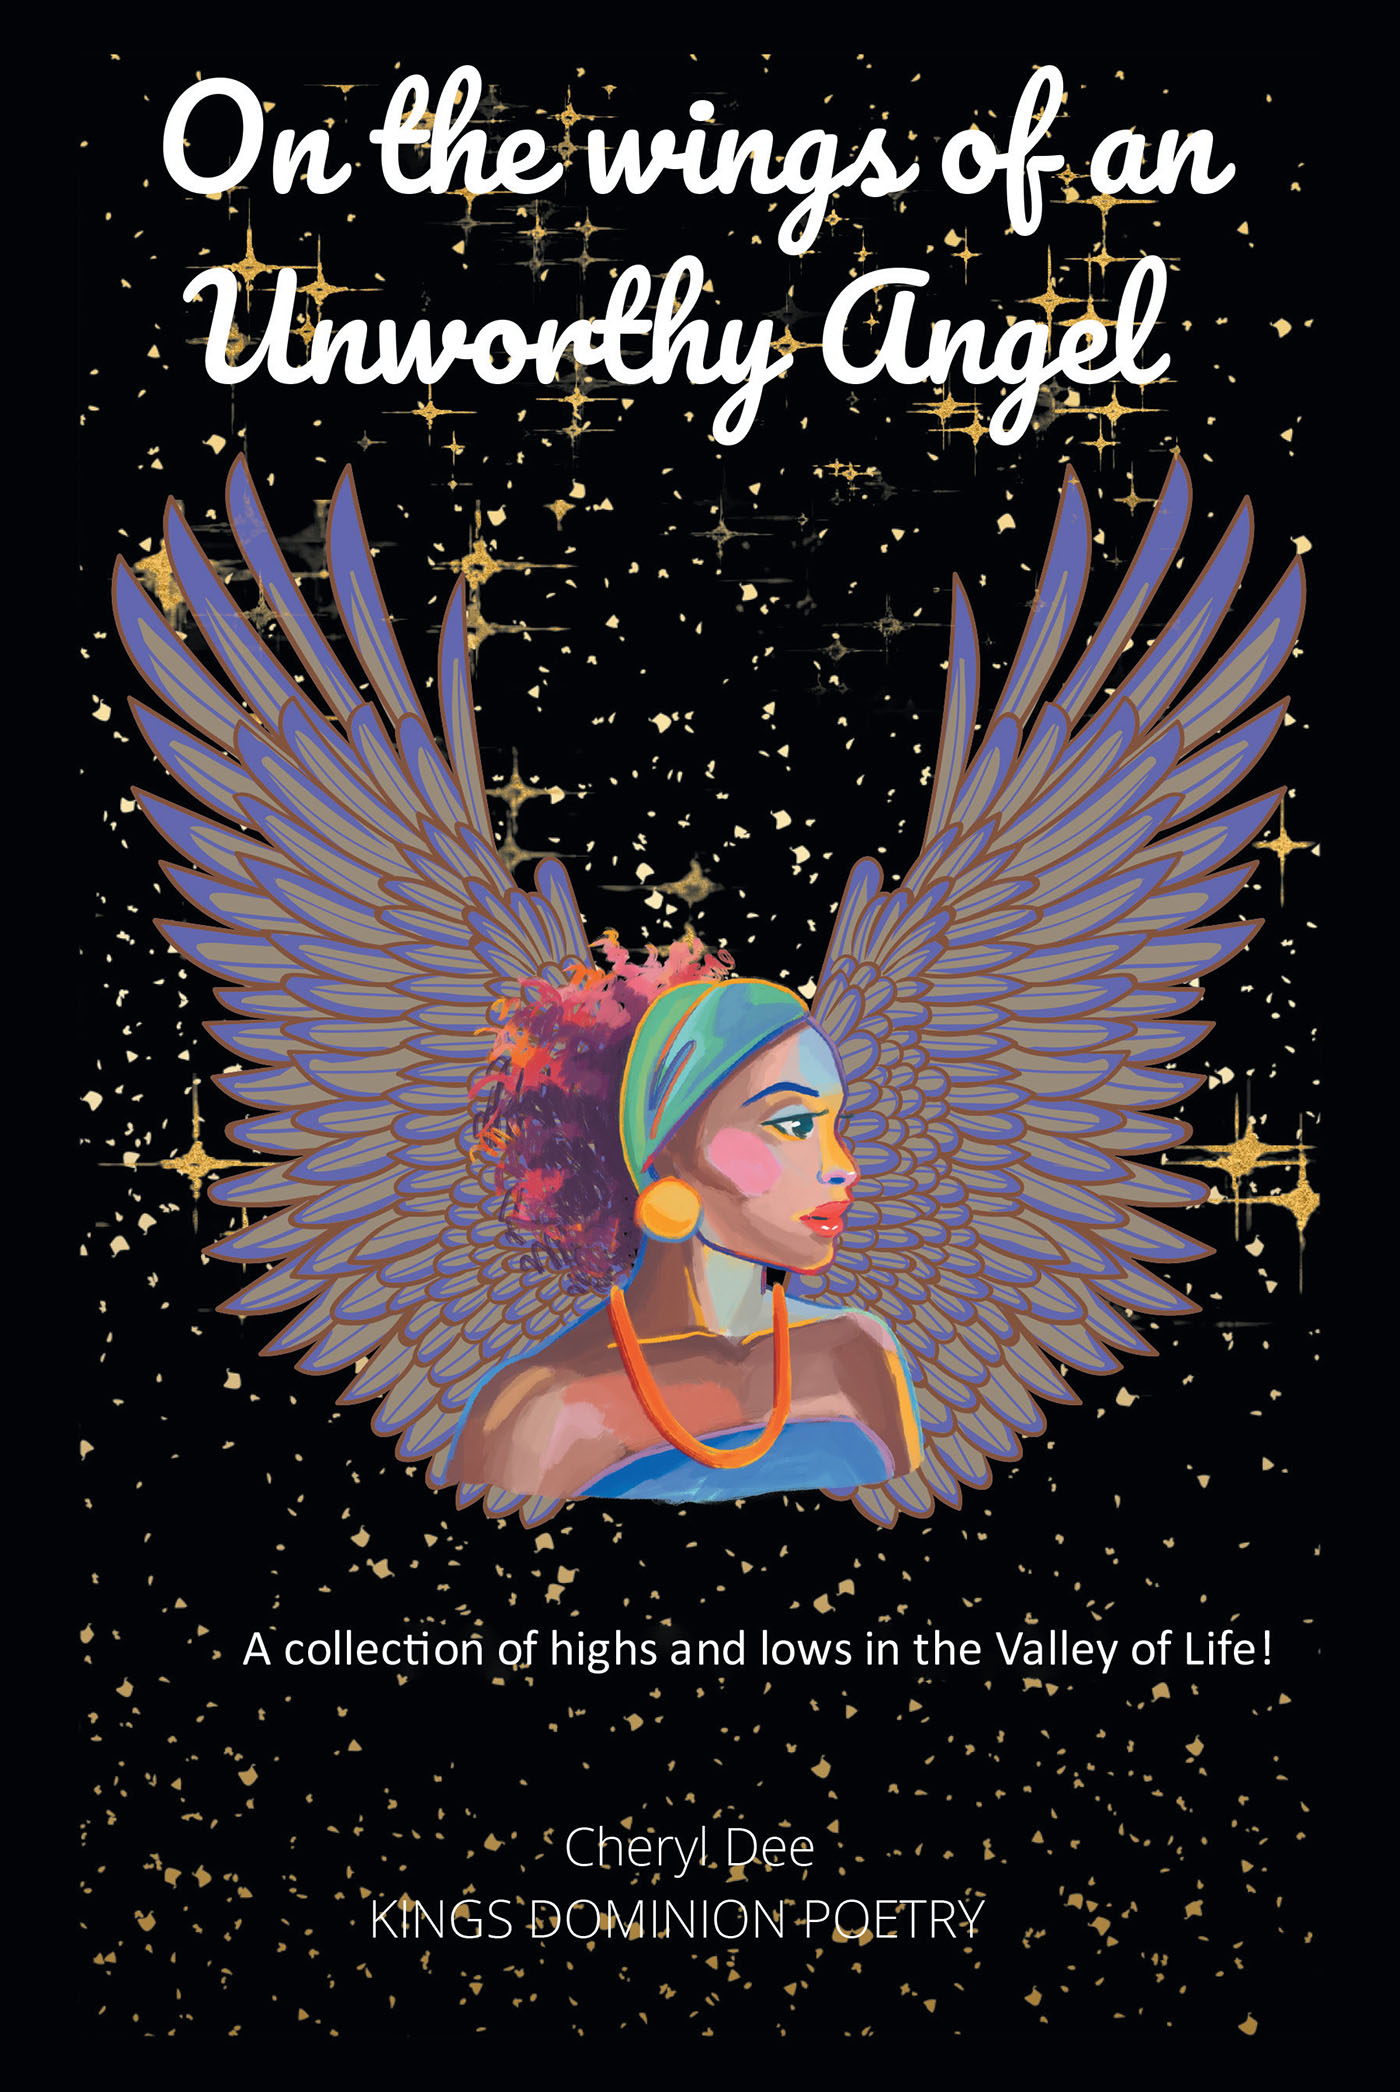 Cheryl Dee’s Newly Released “On the wings of an Unworthy Angel: A collection of highs and lows in the Valley of Life!” is a Moving Poetic Experience